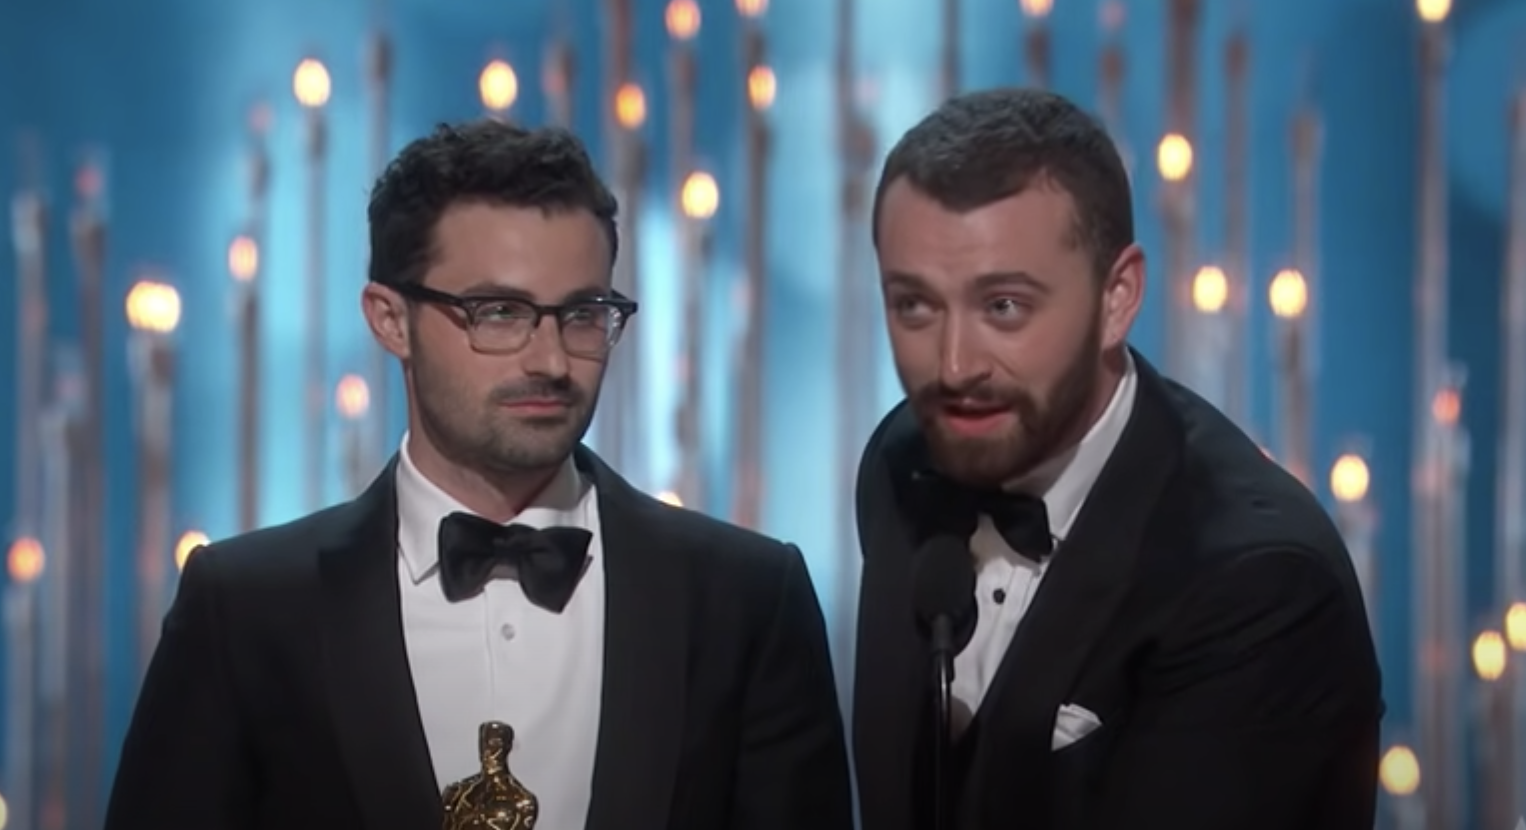 Sam Smith standing next to another man, both wearing bow ties